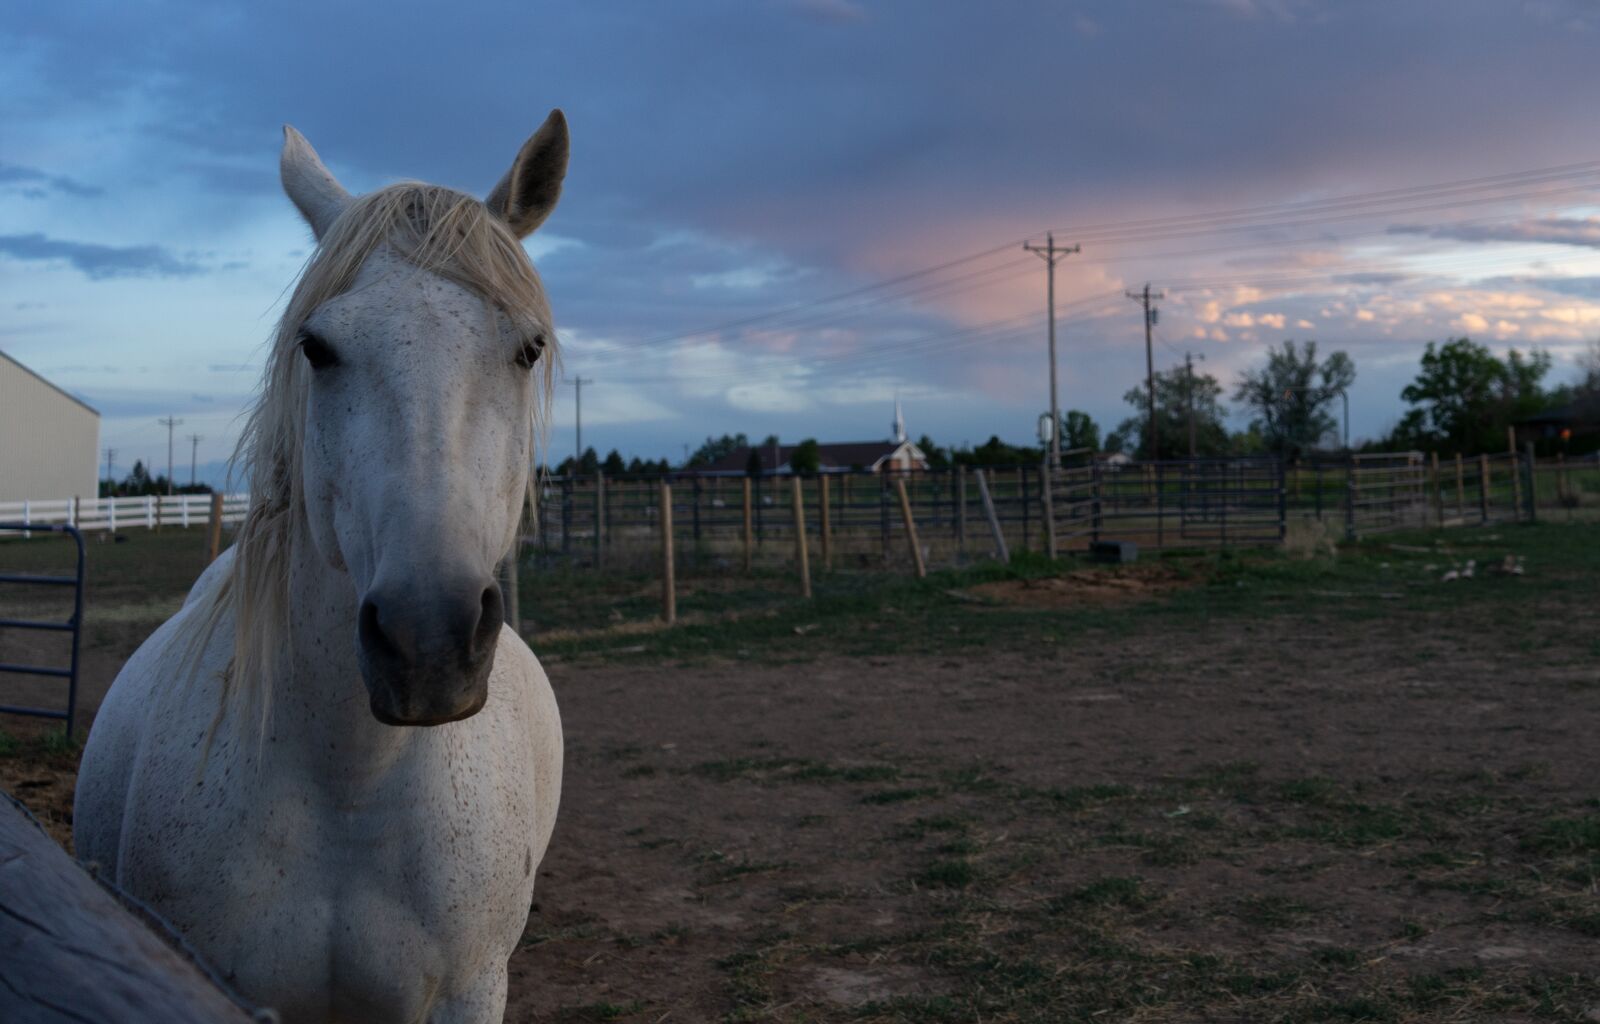 Sony a7 II sample photo. Horse, evening, pasture photography